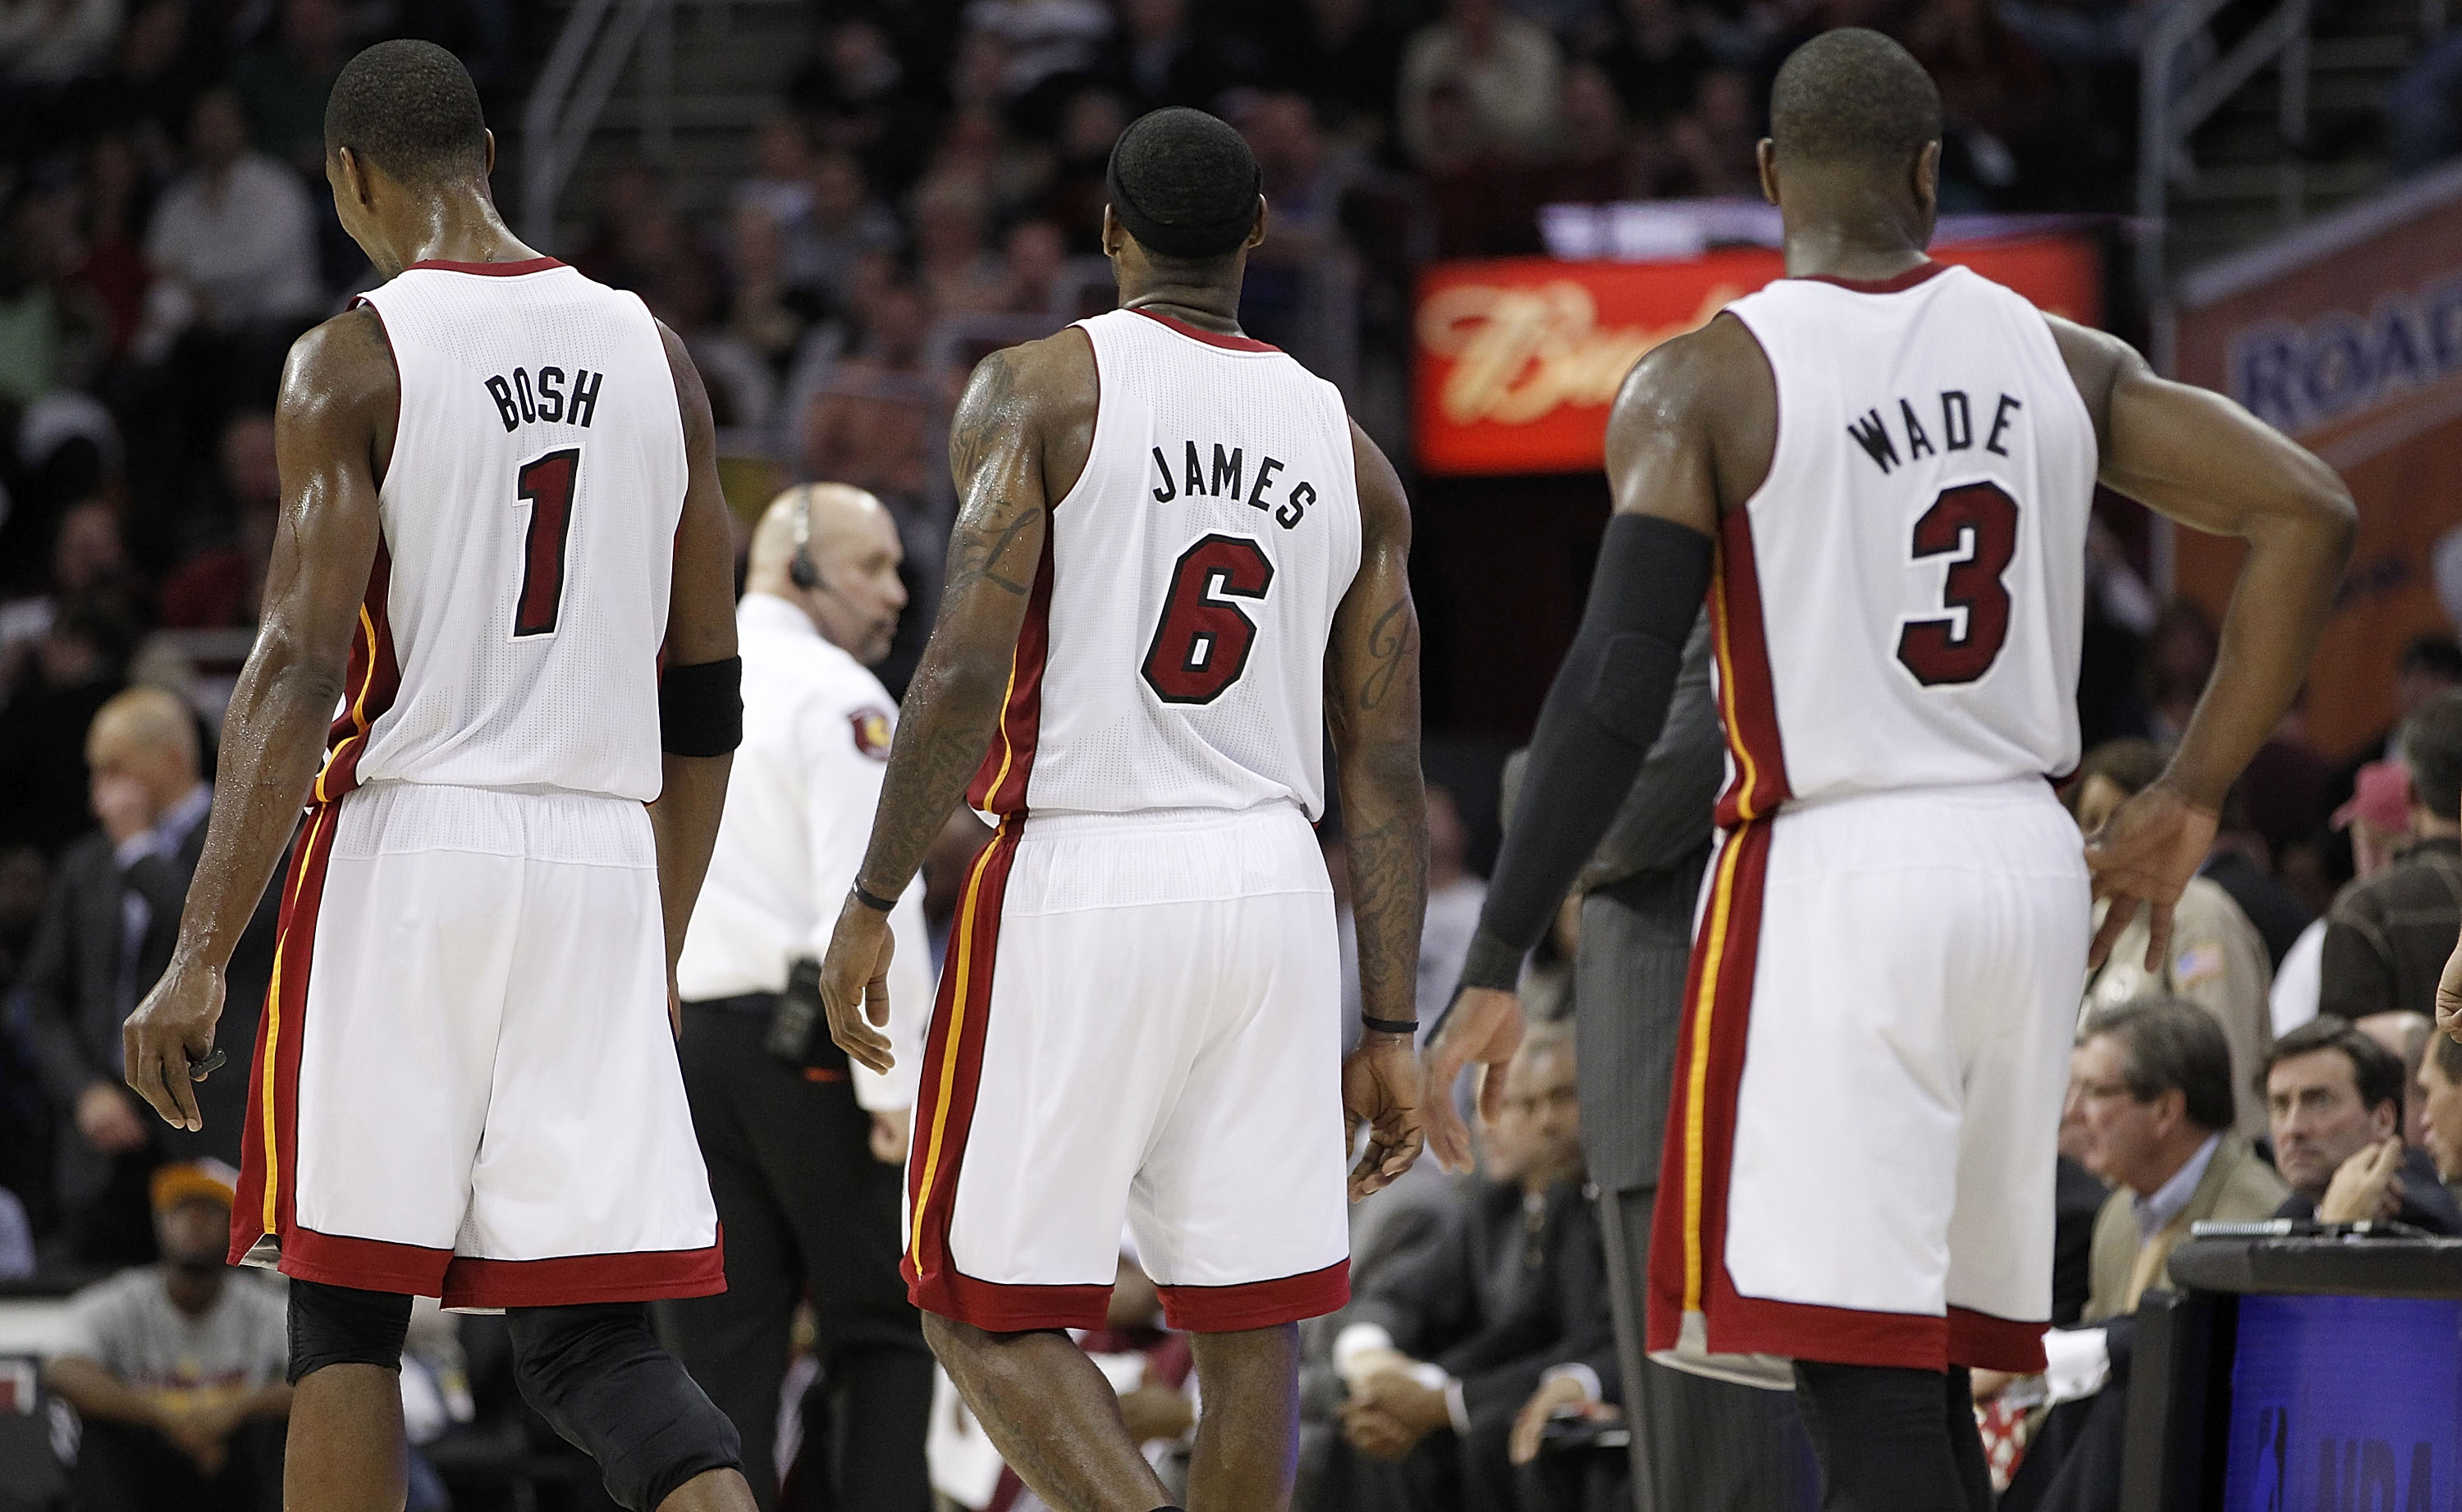 NBA Playoffs 2011: 10 Reasons Why the Miami Heat Will Dominate